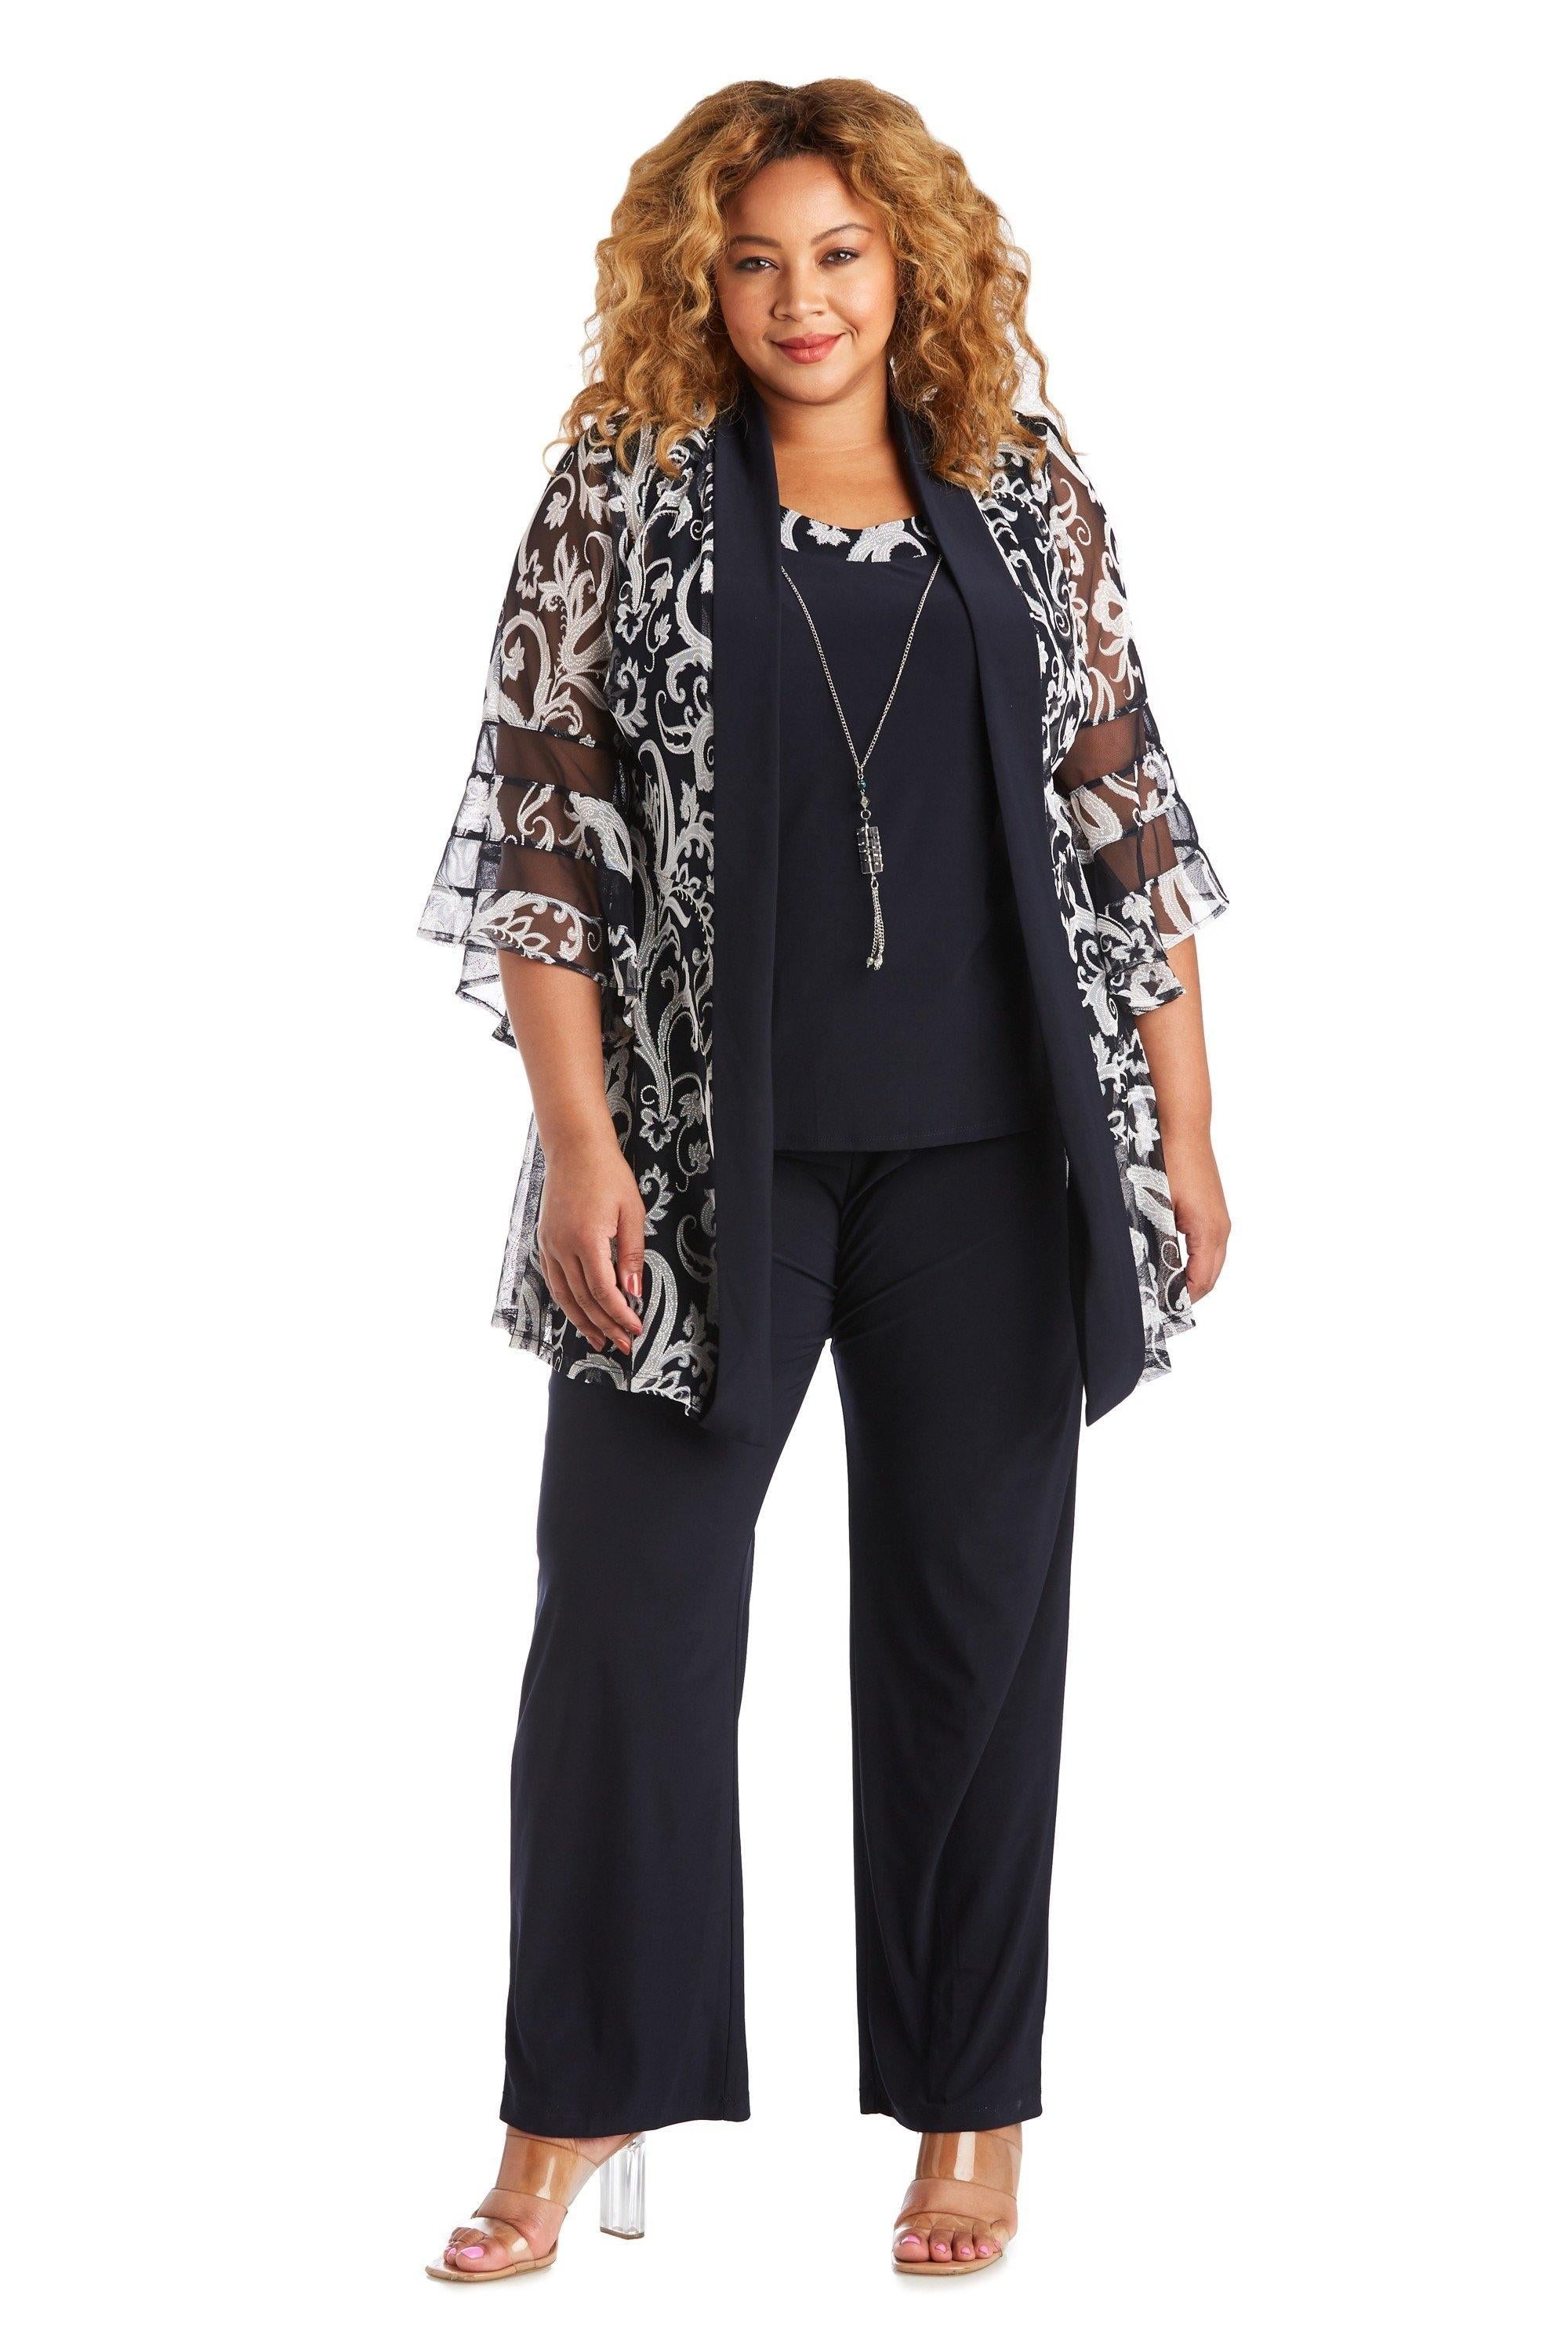 R&M Richards 5902 Formal Pant Suit for $39.99 – The Dress Outlet